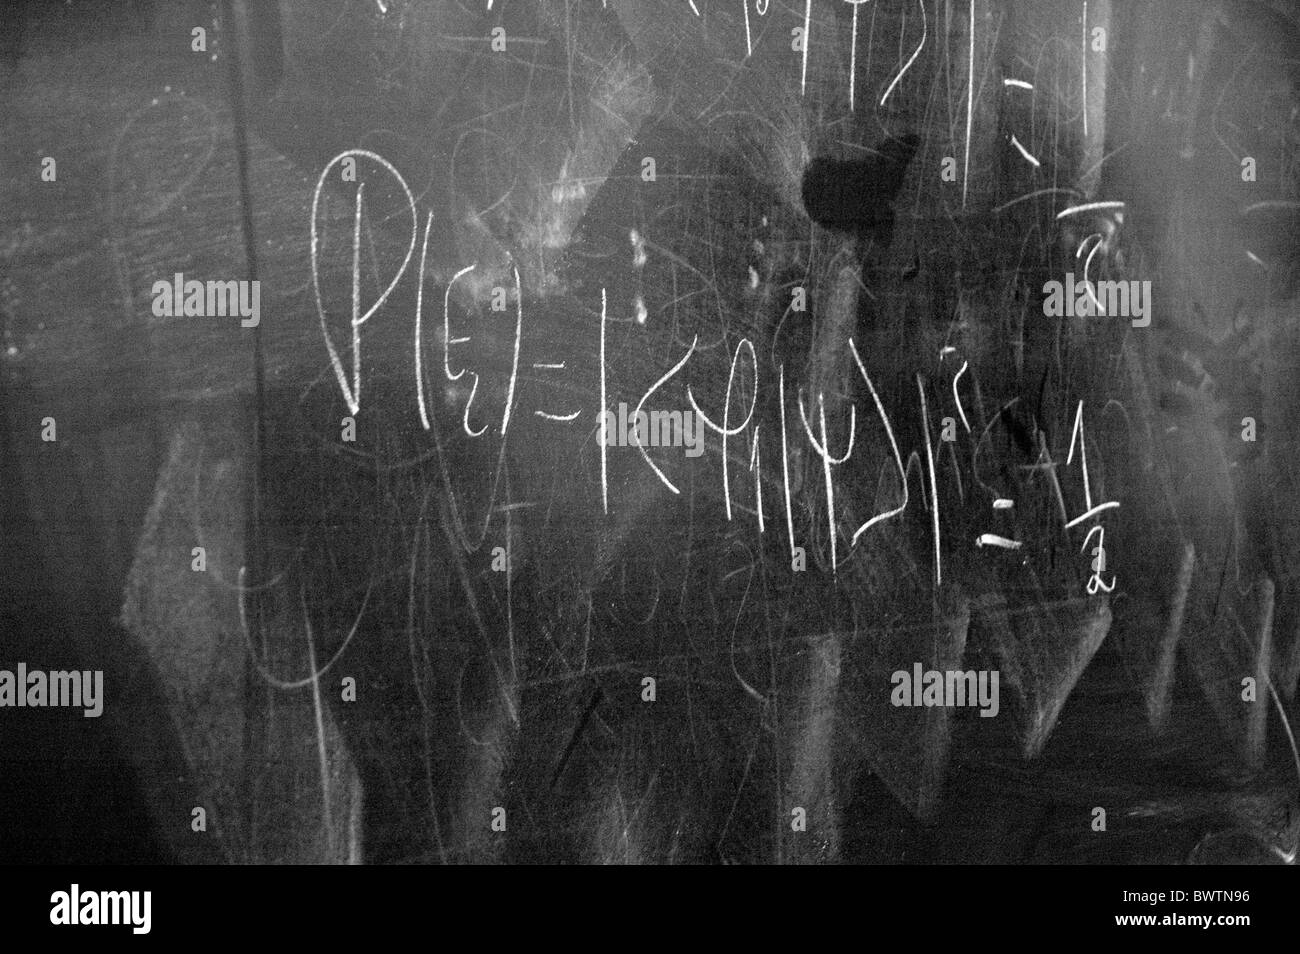 A blackboard in the Physics department of University of Porto Faculty of Sciences during exam season. Stock Photo